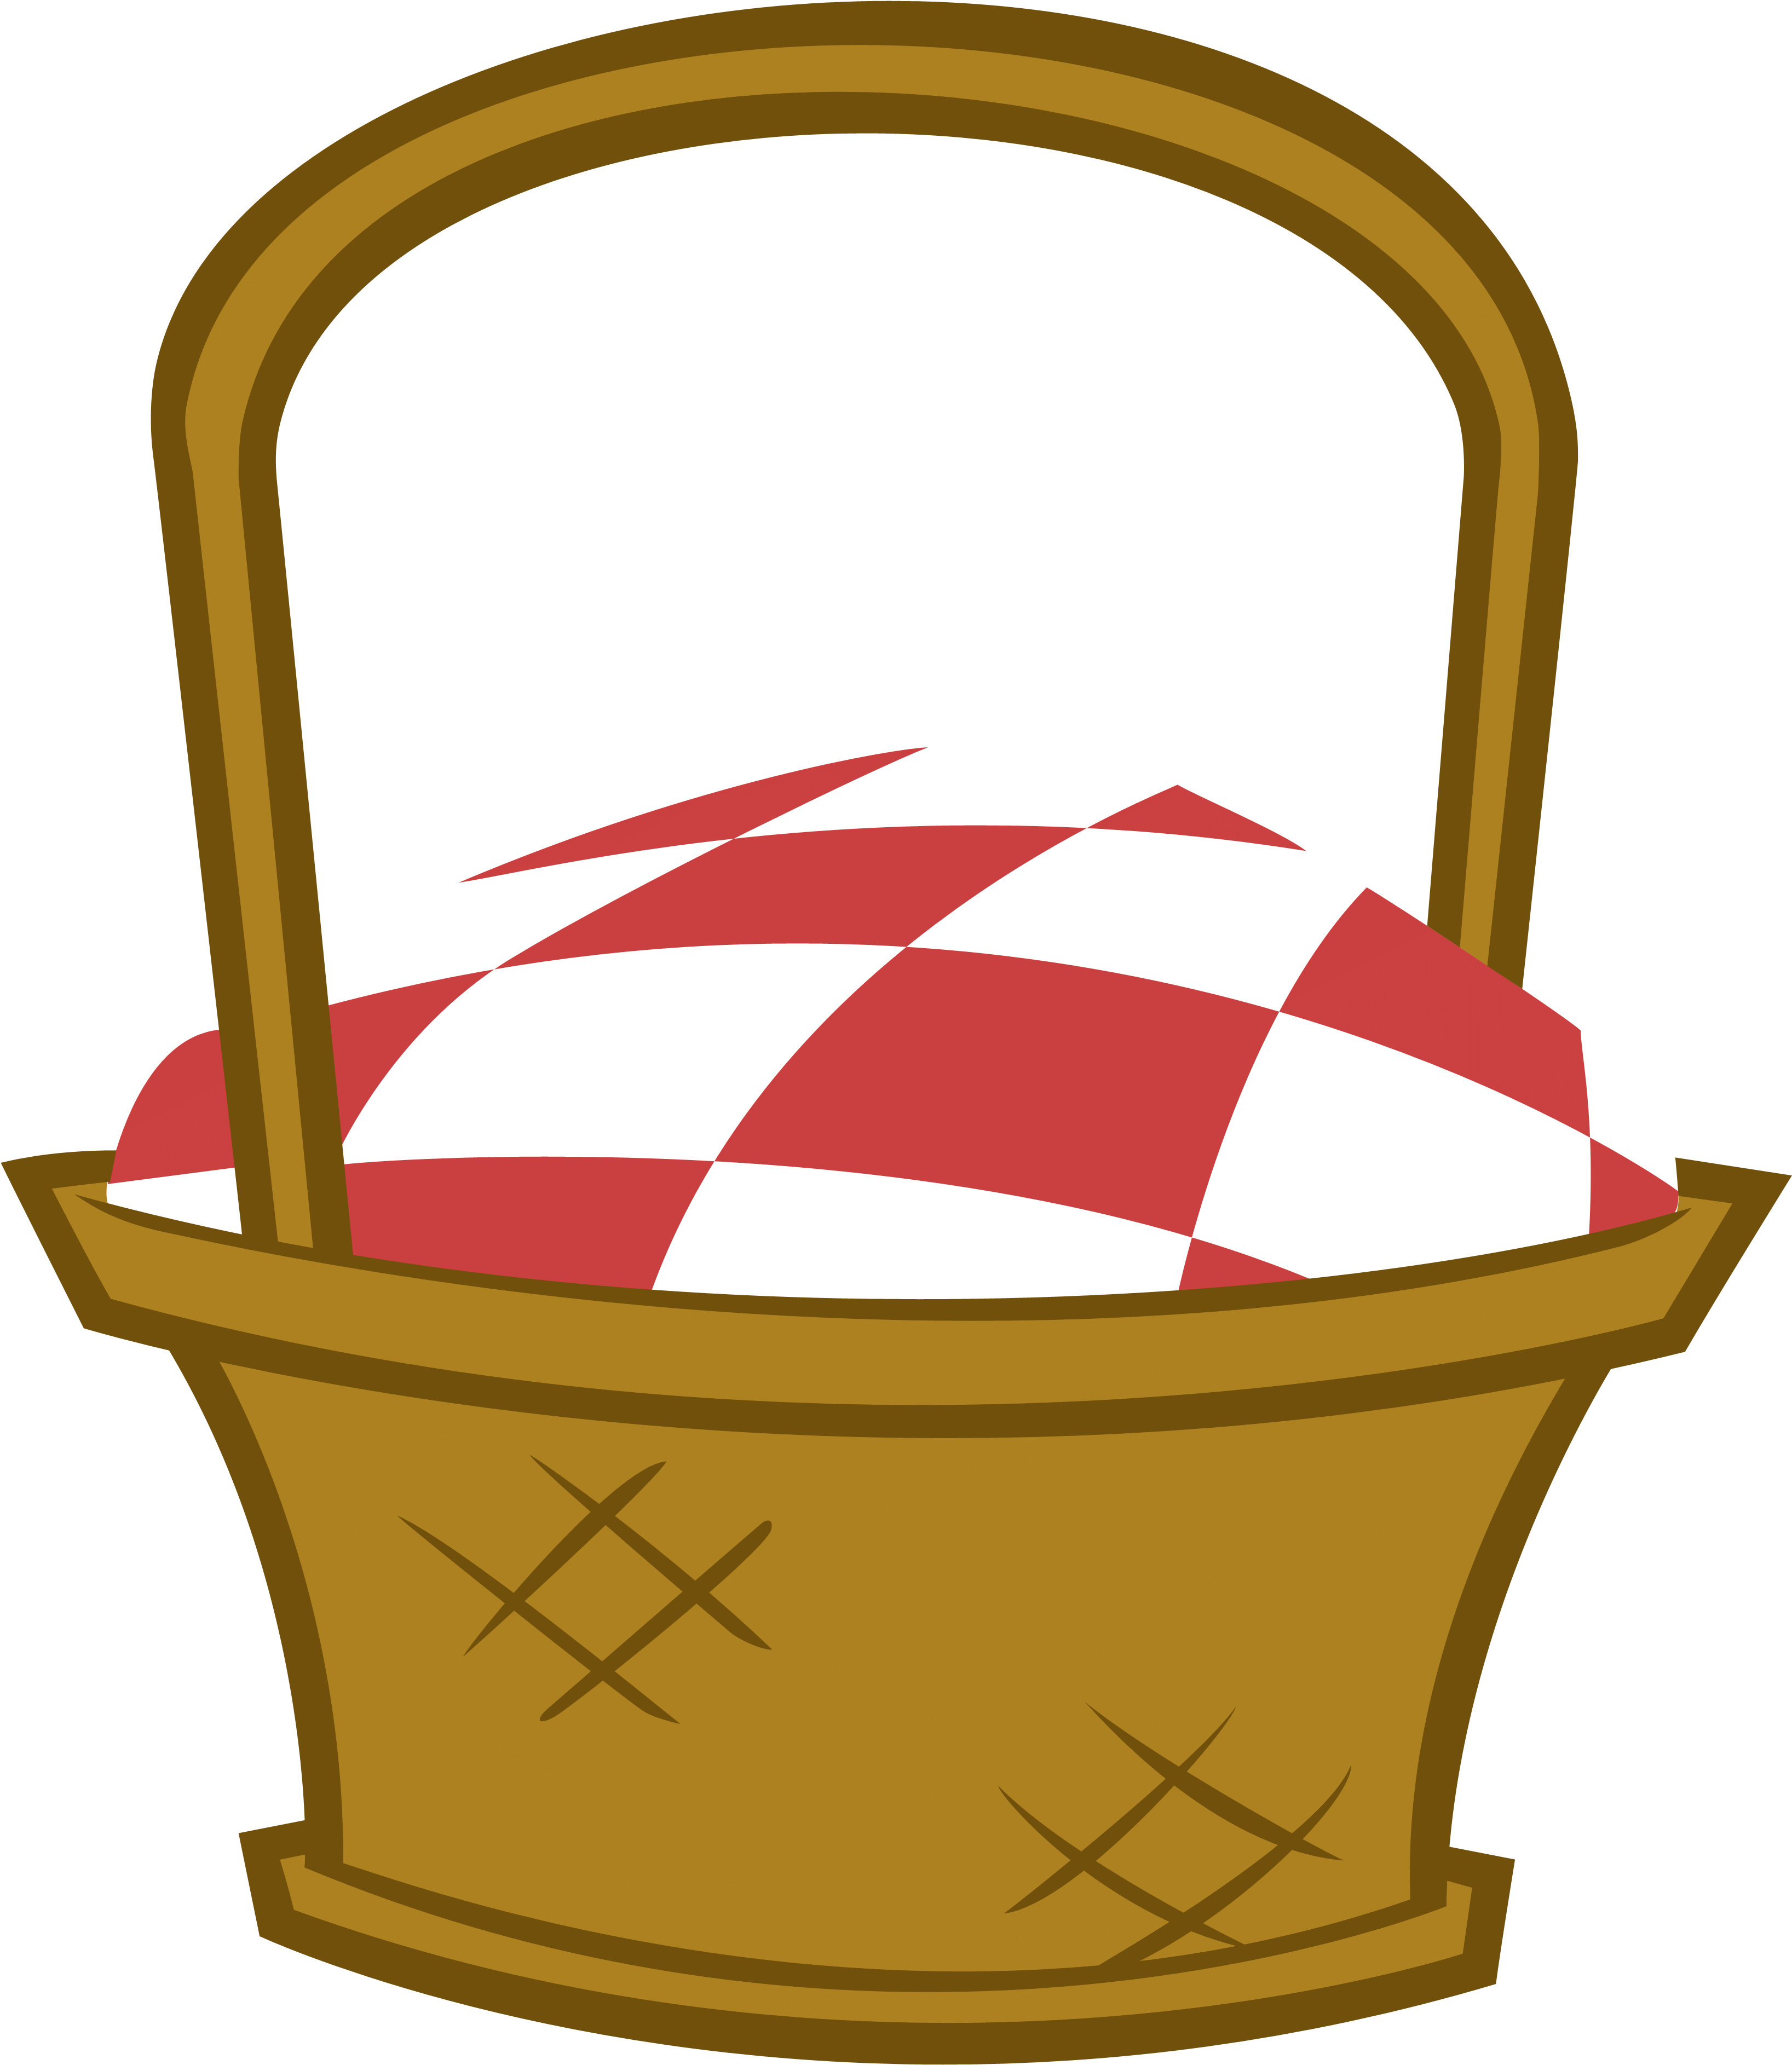 Picnic Basket Clipart Black And White - Little Red Riding Hood Basket Clipart (3500x4000)